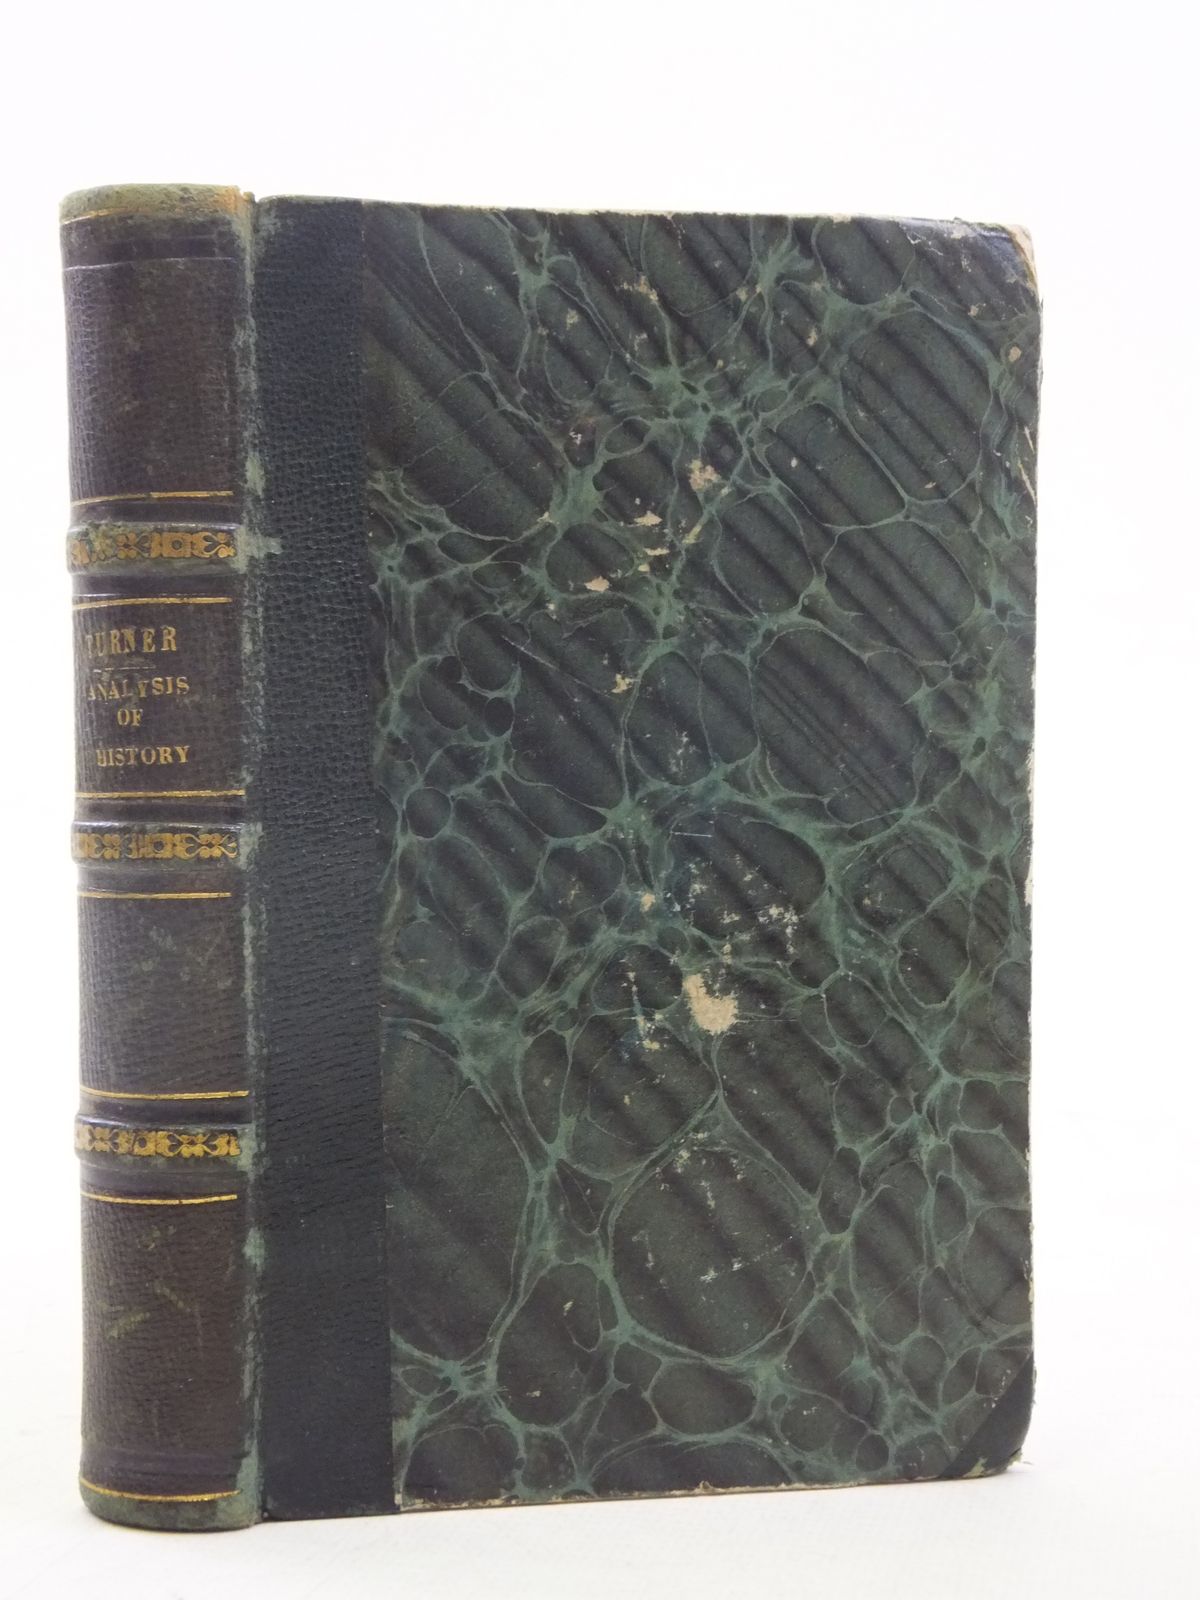 Photo of HEADS OF AN ANALYSIS OF HISTORY (3 VOLUMES IN ONE) written by Turner, Dawson W. published by John W. Parker And Son (STOCK CODE: 1606790)  for sale by Stella & Rose's Books